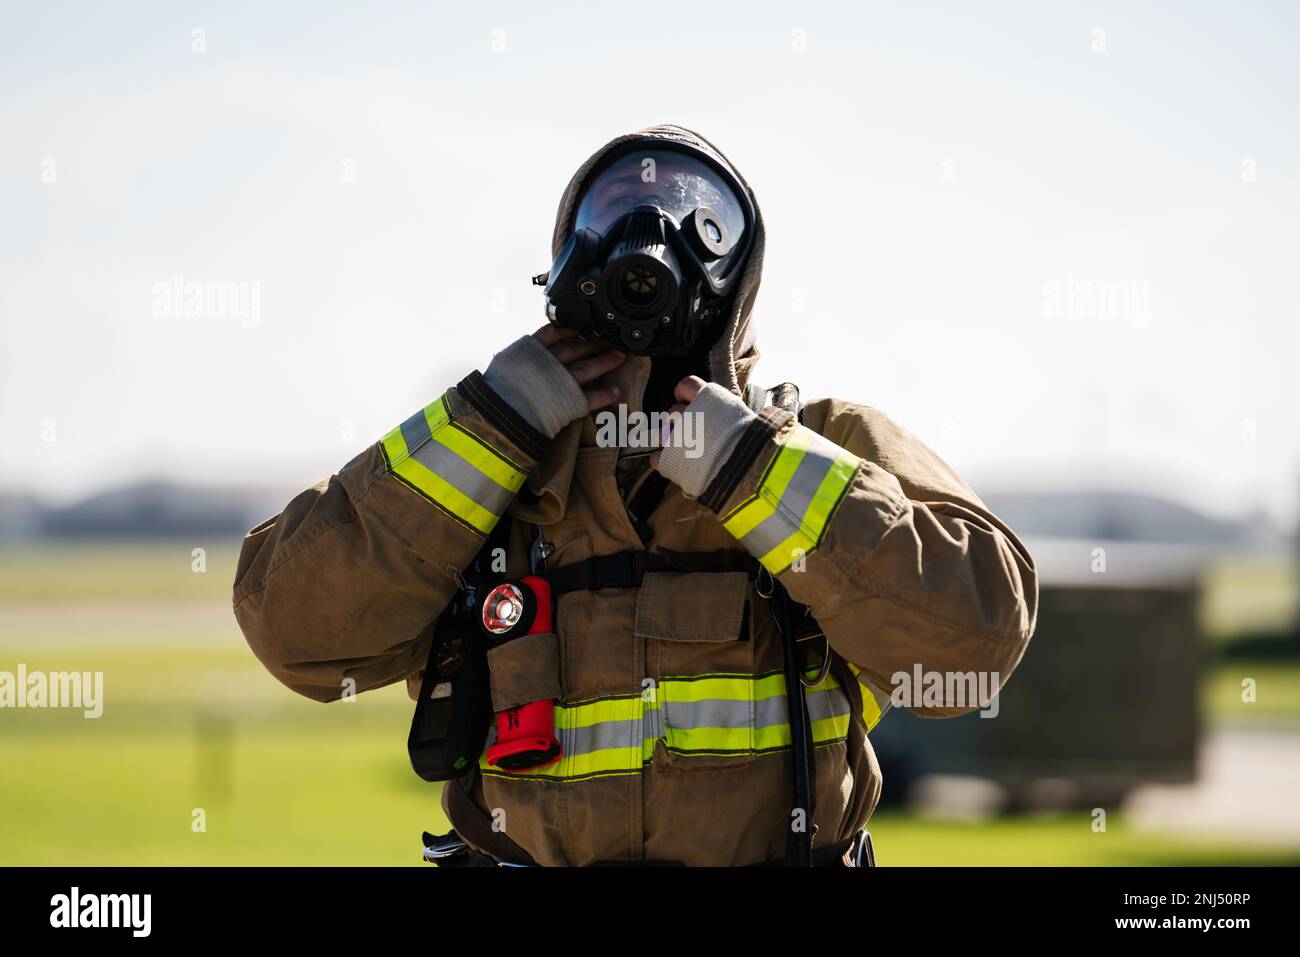 U.S. Air Force Staff Sgt. Dominic Pavlich, 6th Civil Engineer Squadron firefighter, prepares his protective equipment before engaging in an aircraft rescue and firefighting proficiency training at MacDill Air Force Base, Florida, Aug. 5, 2022. ARFF training helps prepare Air Force firefighters to manage compromised aircraft in emergency situations. Stock Photo